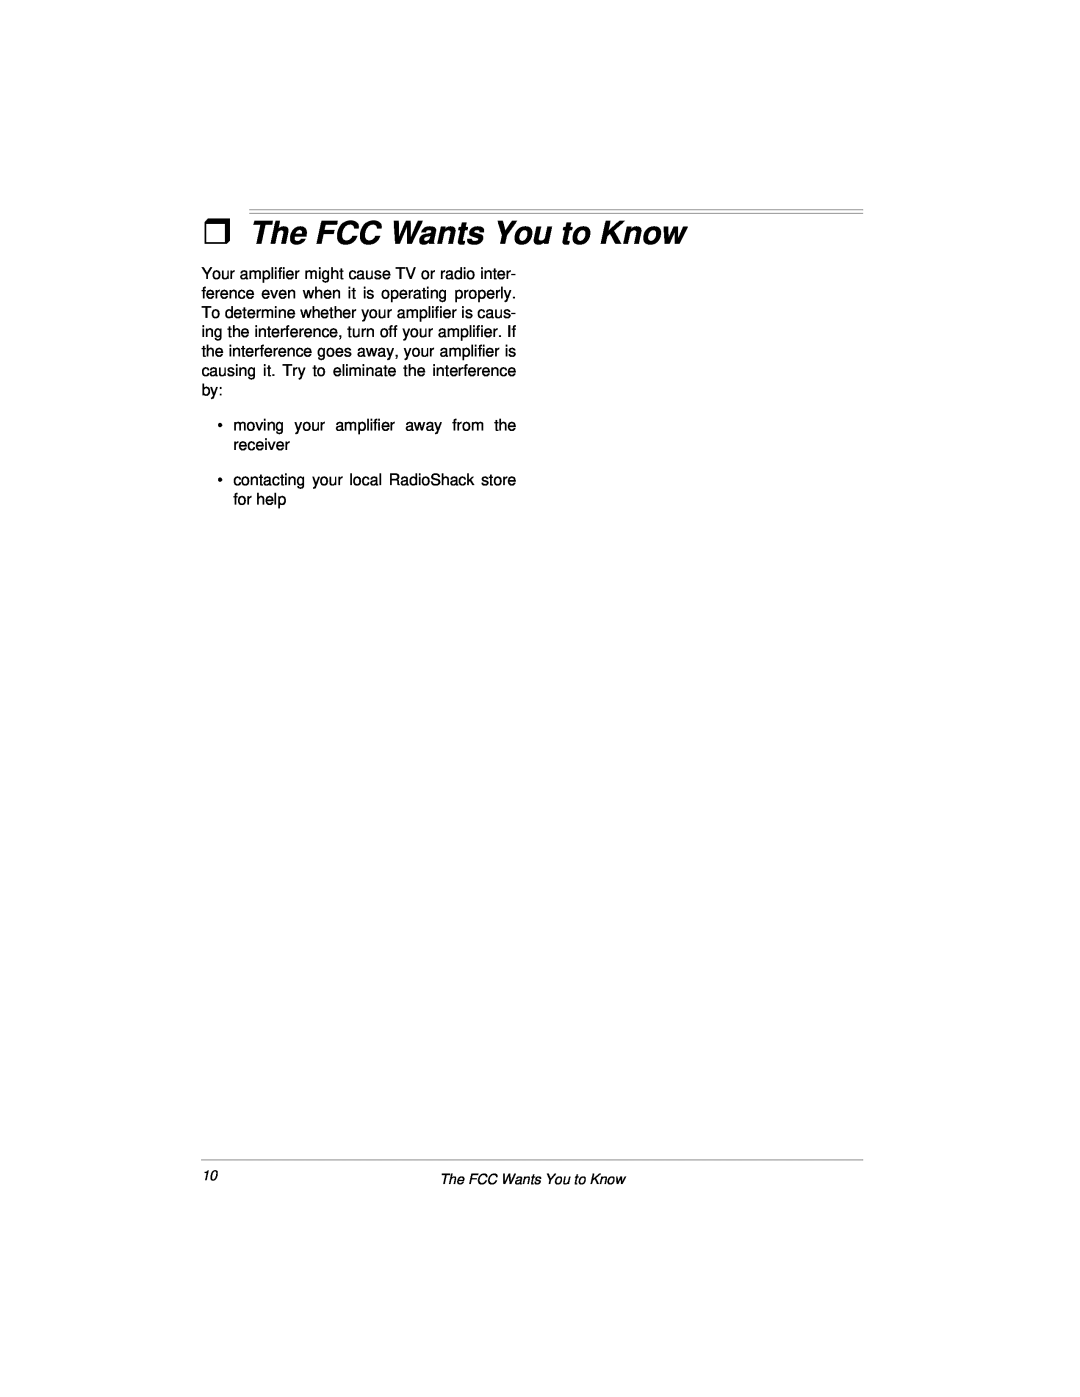 Radio Shack 04A00, 32-2004 owner manual ˆThe FCC Wants You to Know 